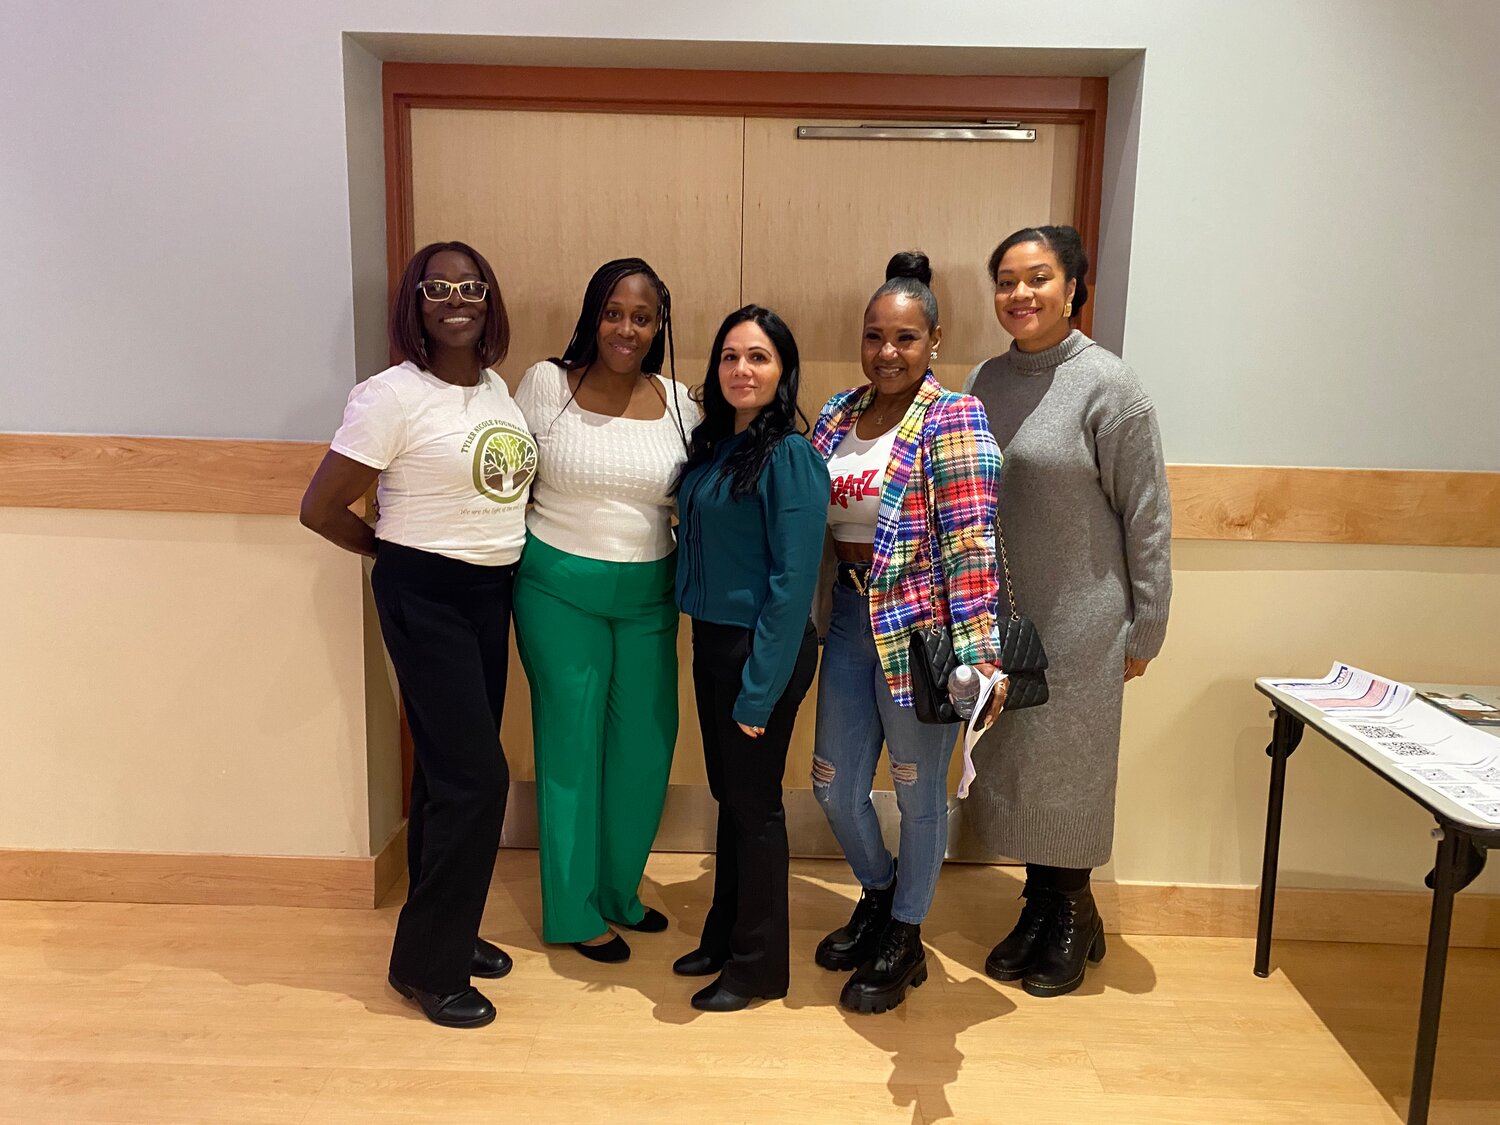 Tracey Little, far left, Sharon Turnage, Marcella Pizzo, Nordrene Henry and Amina Woods at an Equity 4 LI Youth event last week in East Meadow, where the focus was on perinatal loss in minority communities.